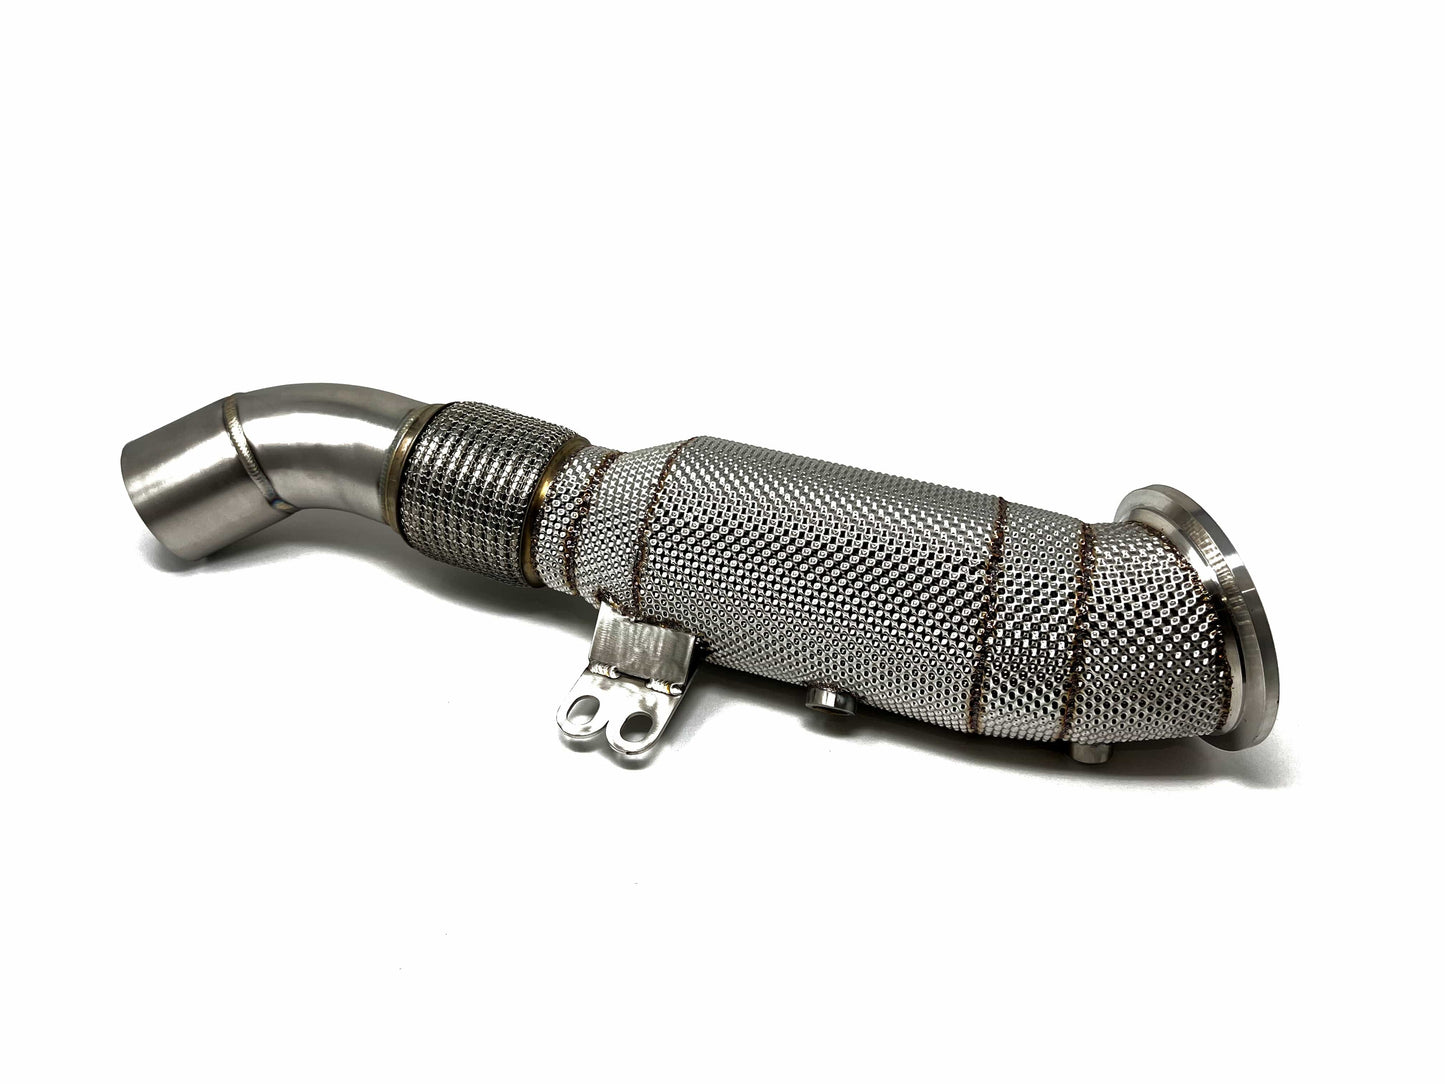 Masata BMW B58 F20 F32 G01 G30 Catted Downpipe With Heat Shield (Inc. M140i, 340i, 540i, & 740i) 200 Cells (Non-OPF Models)